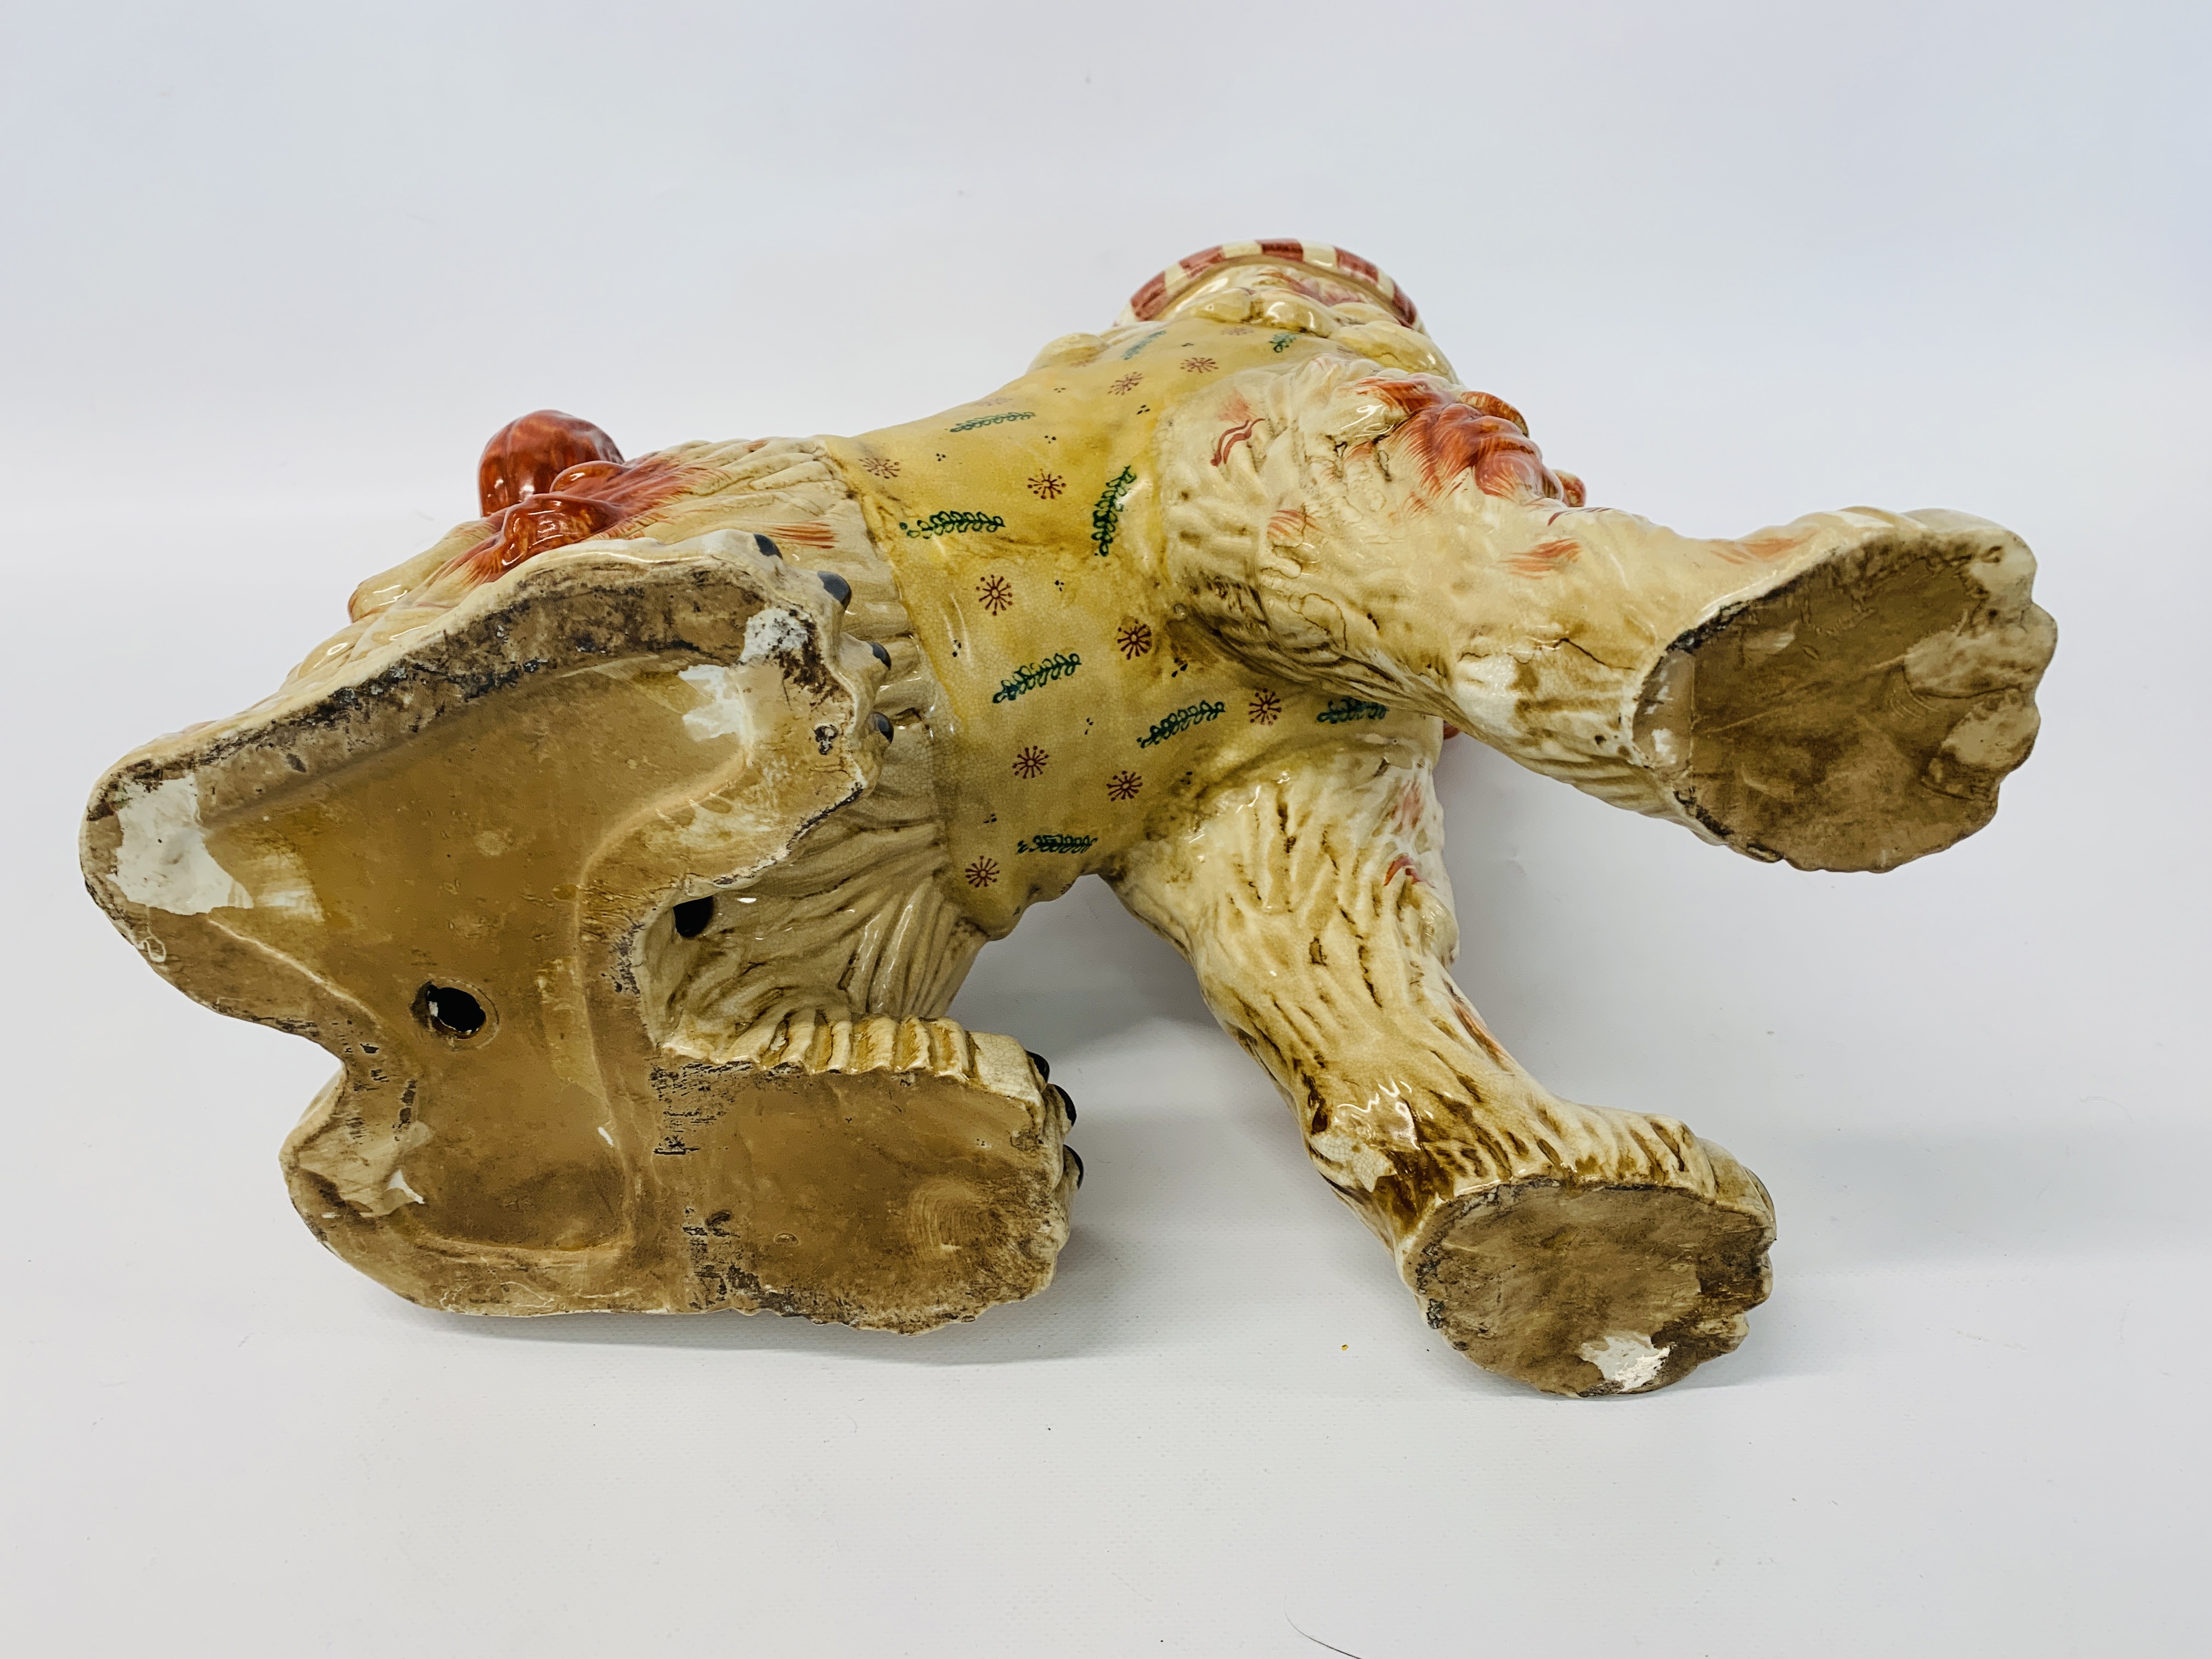 A LARGE REPRODUCTION STAFFORDSHIRE STYLE DOG ORNAMENT "JOCK" HEIGHT 45cm - Image 8 of 8